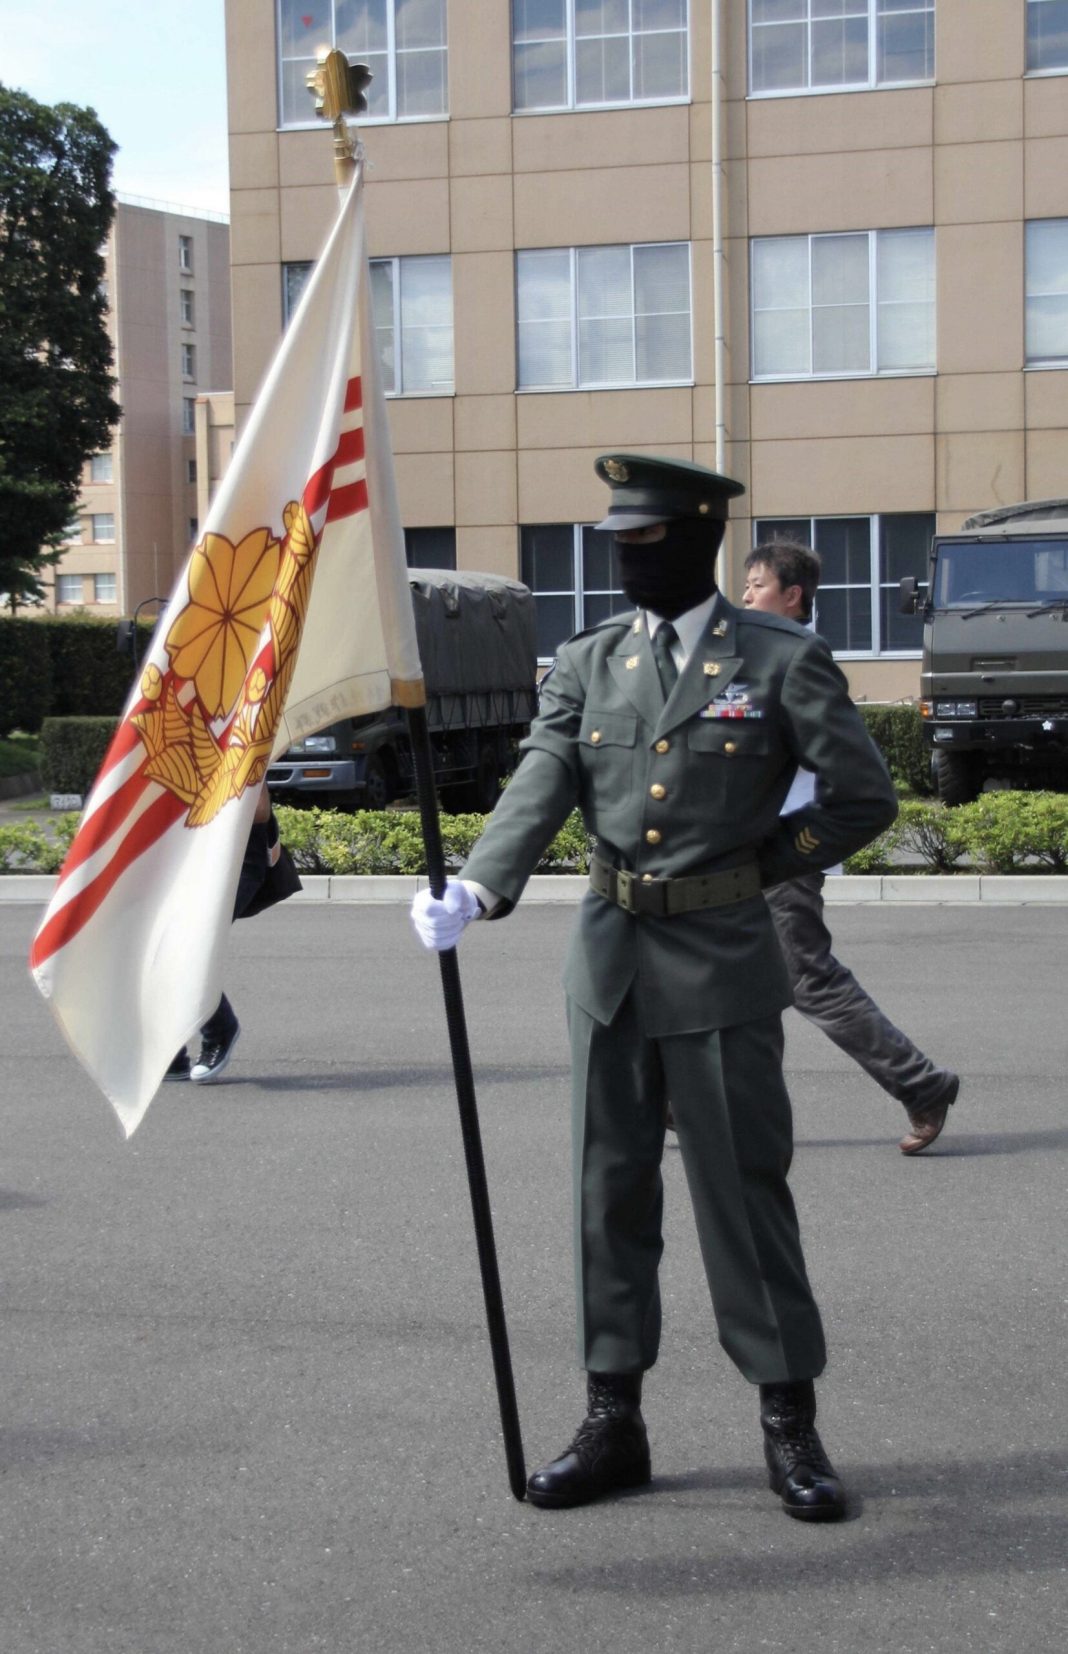 Japanese Special Forces Group operator in dress uniform and balaclava